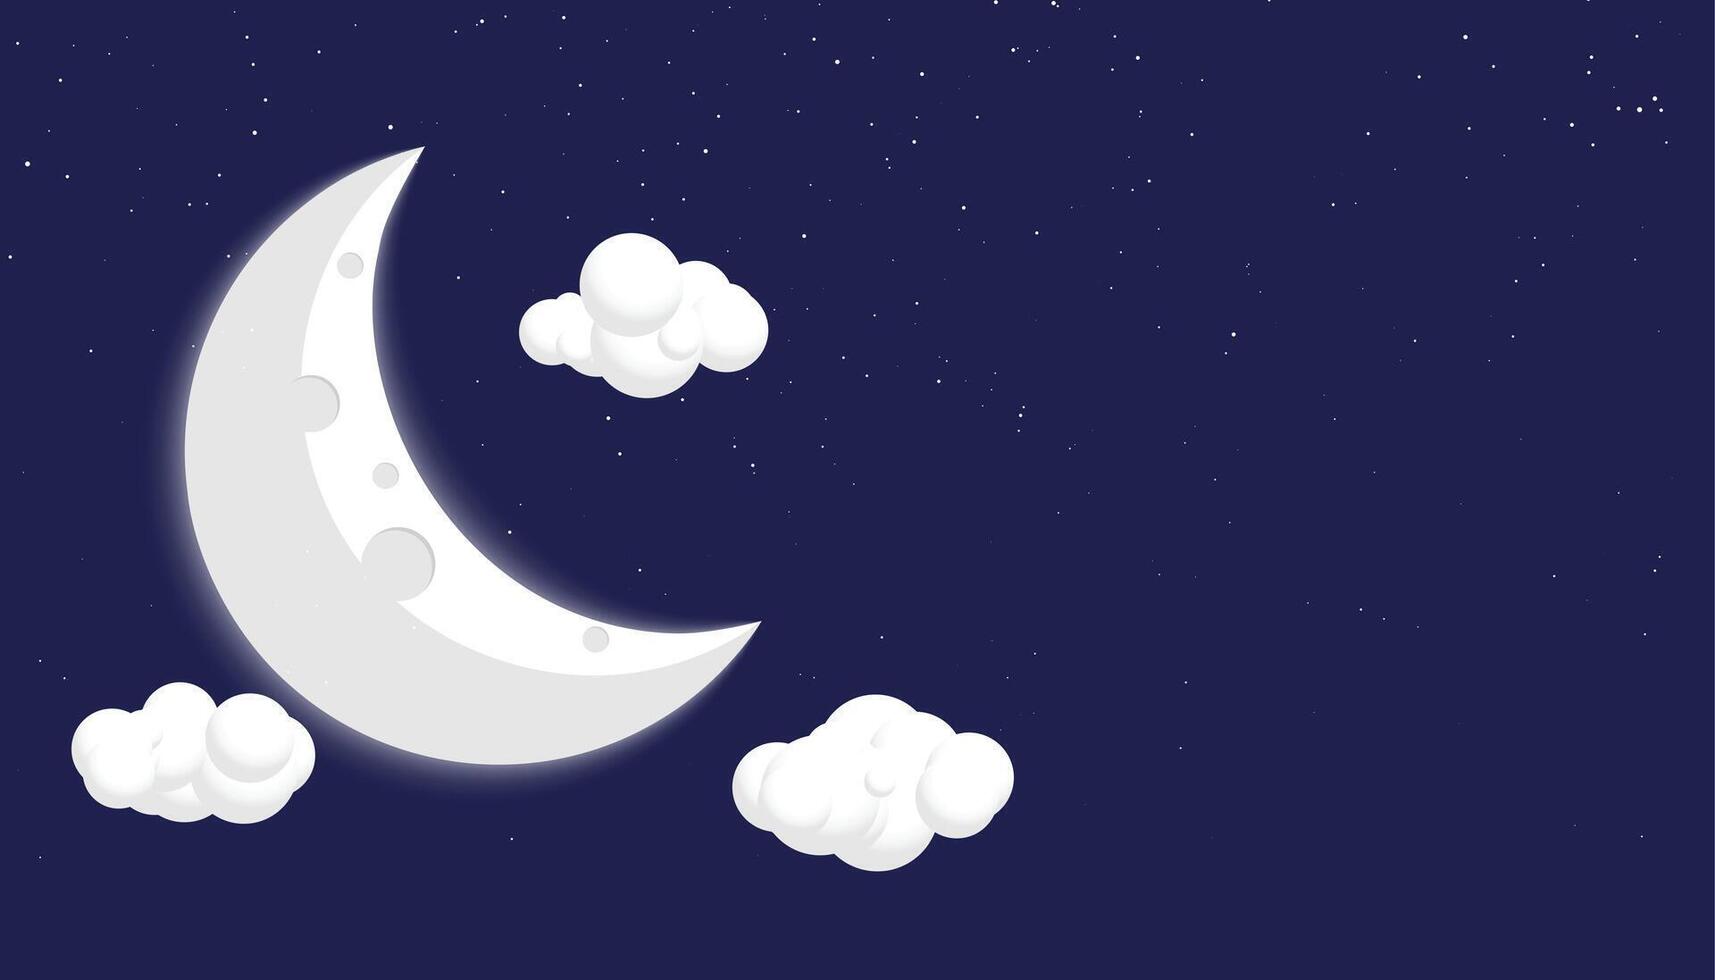 comic style moon stars and clouds background design vector